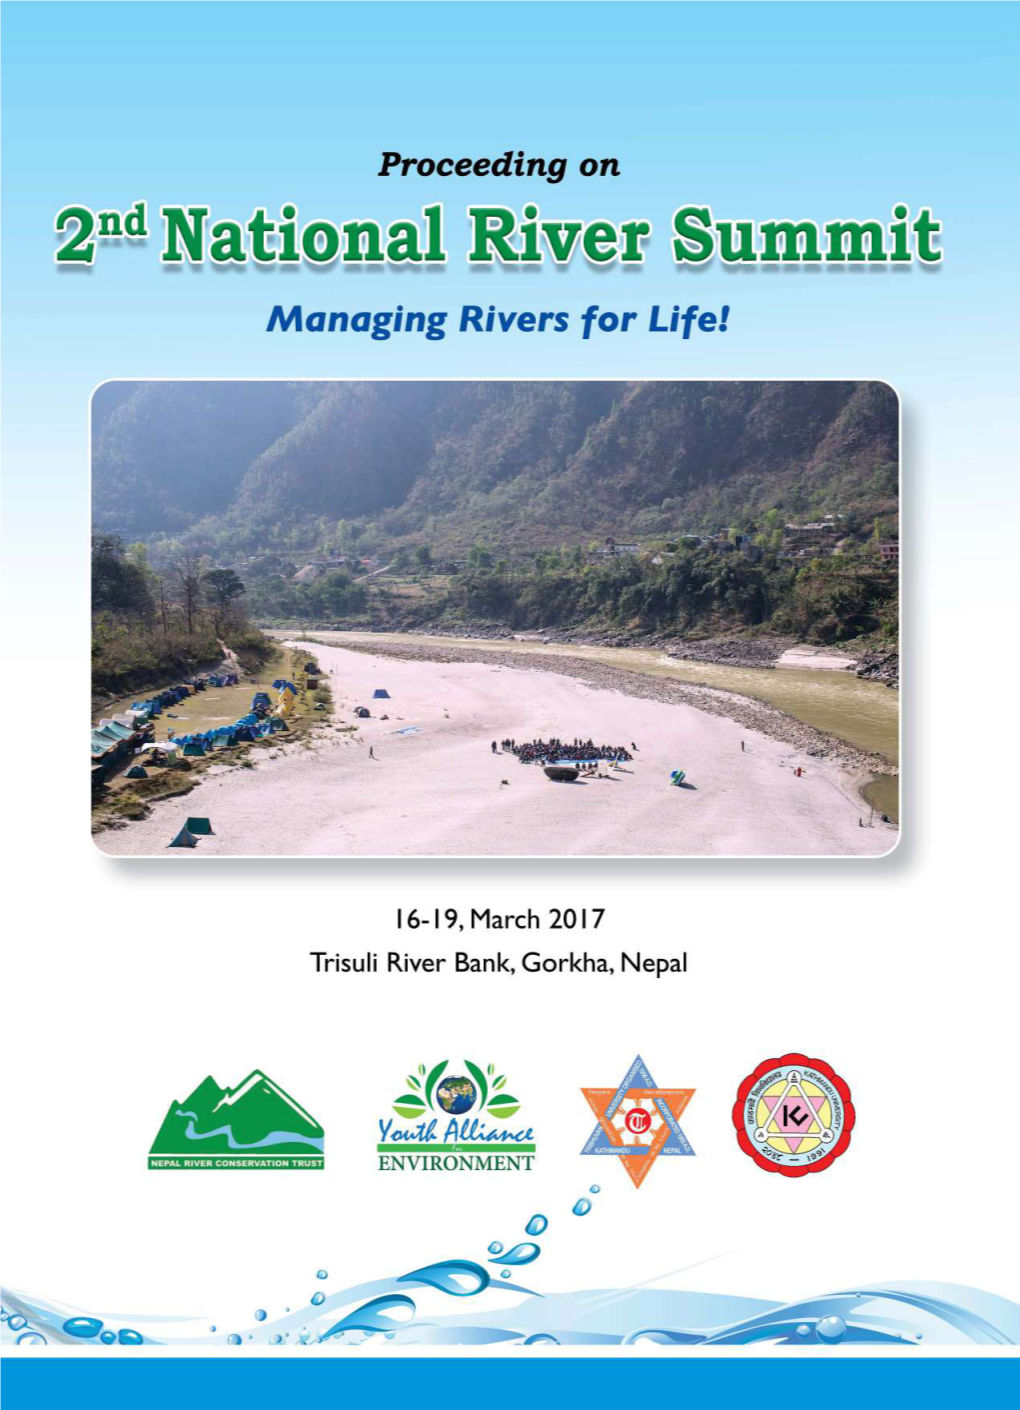 2. Proceedings of 2Nd National River Summit 2017